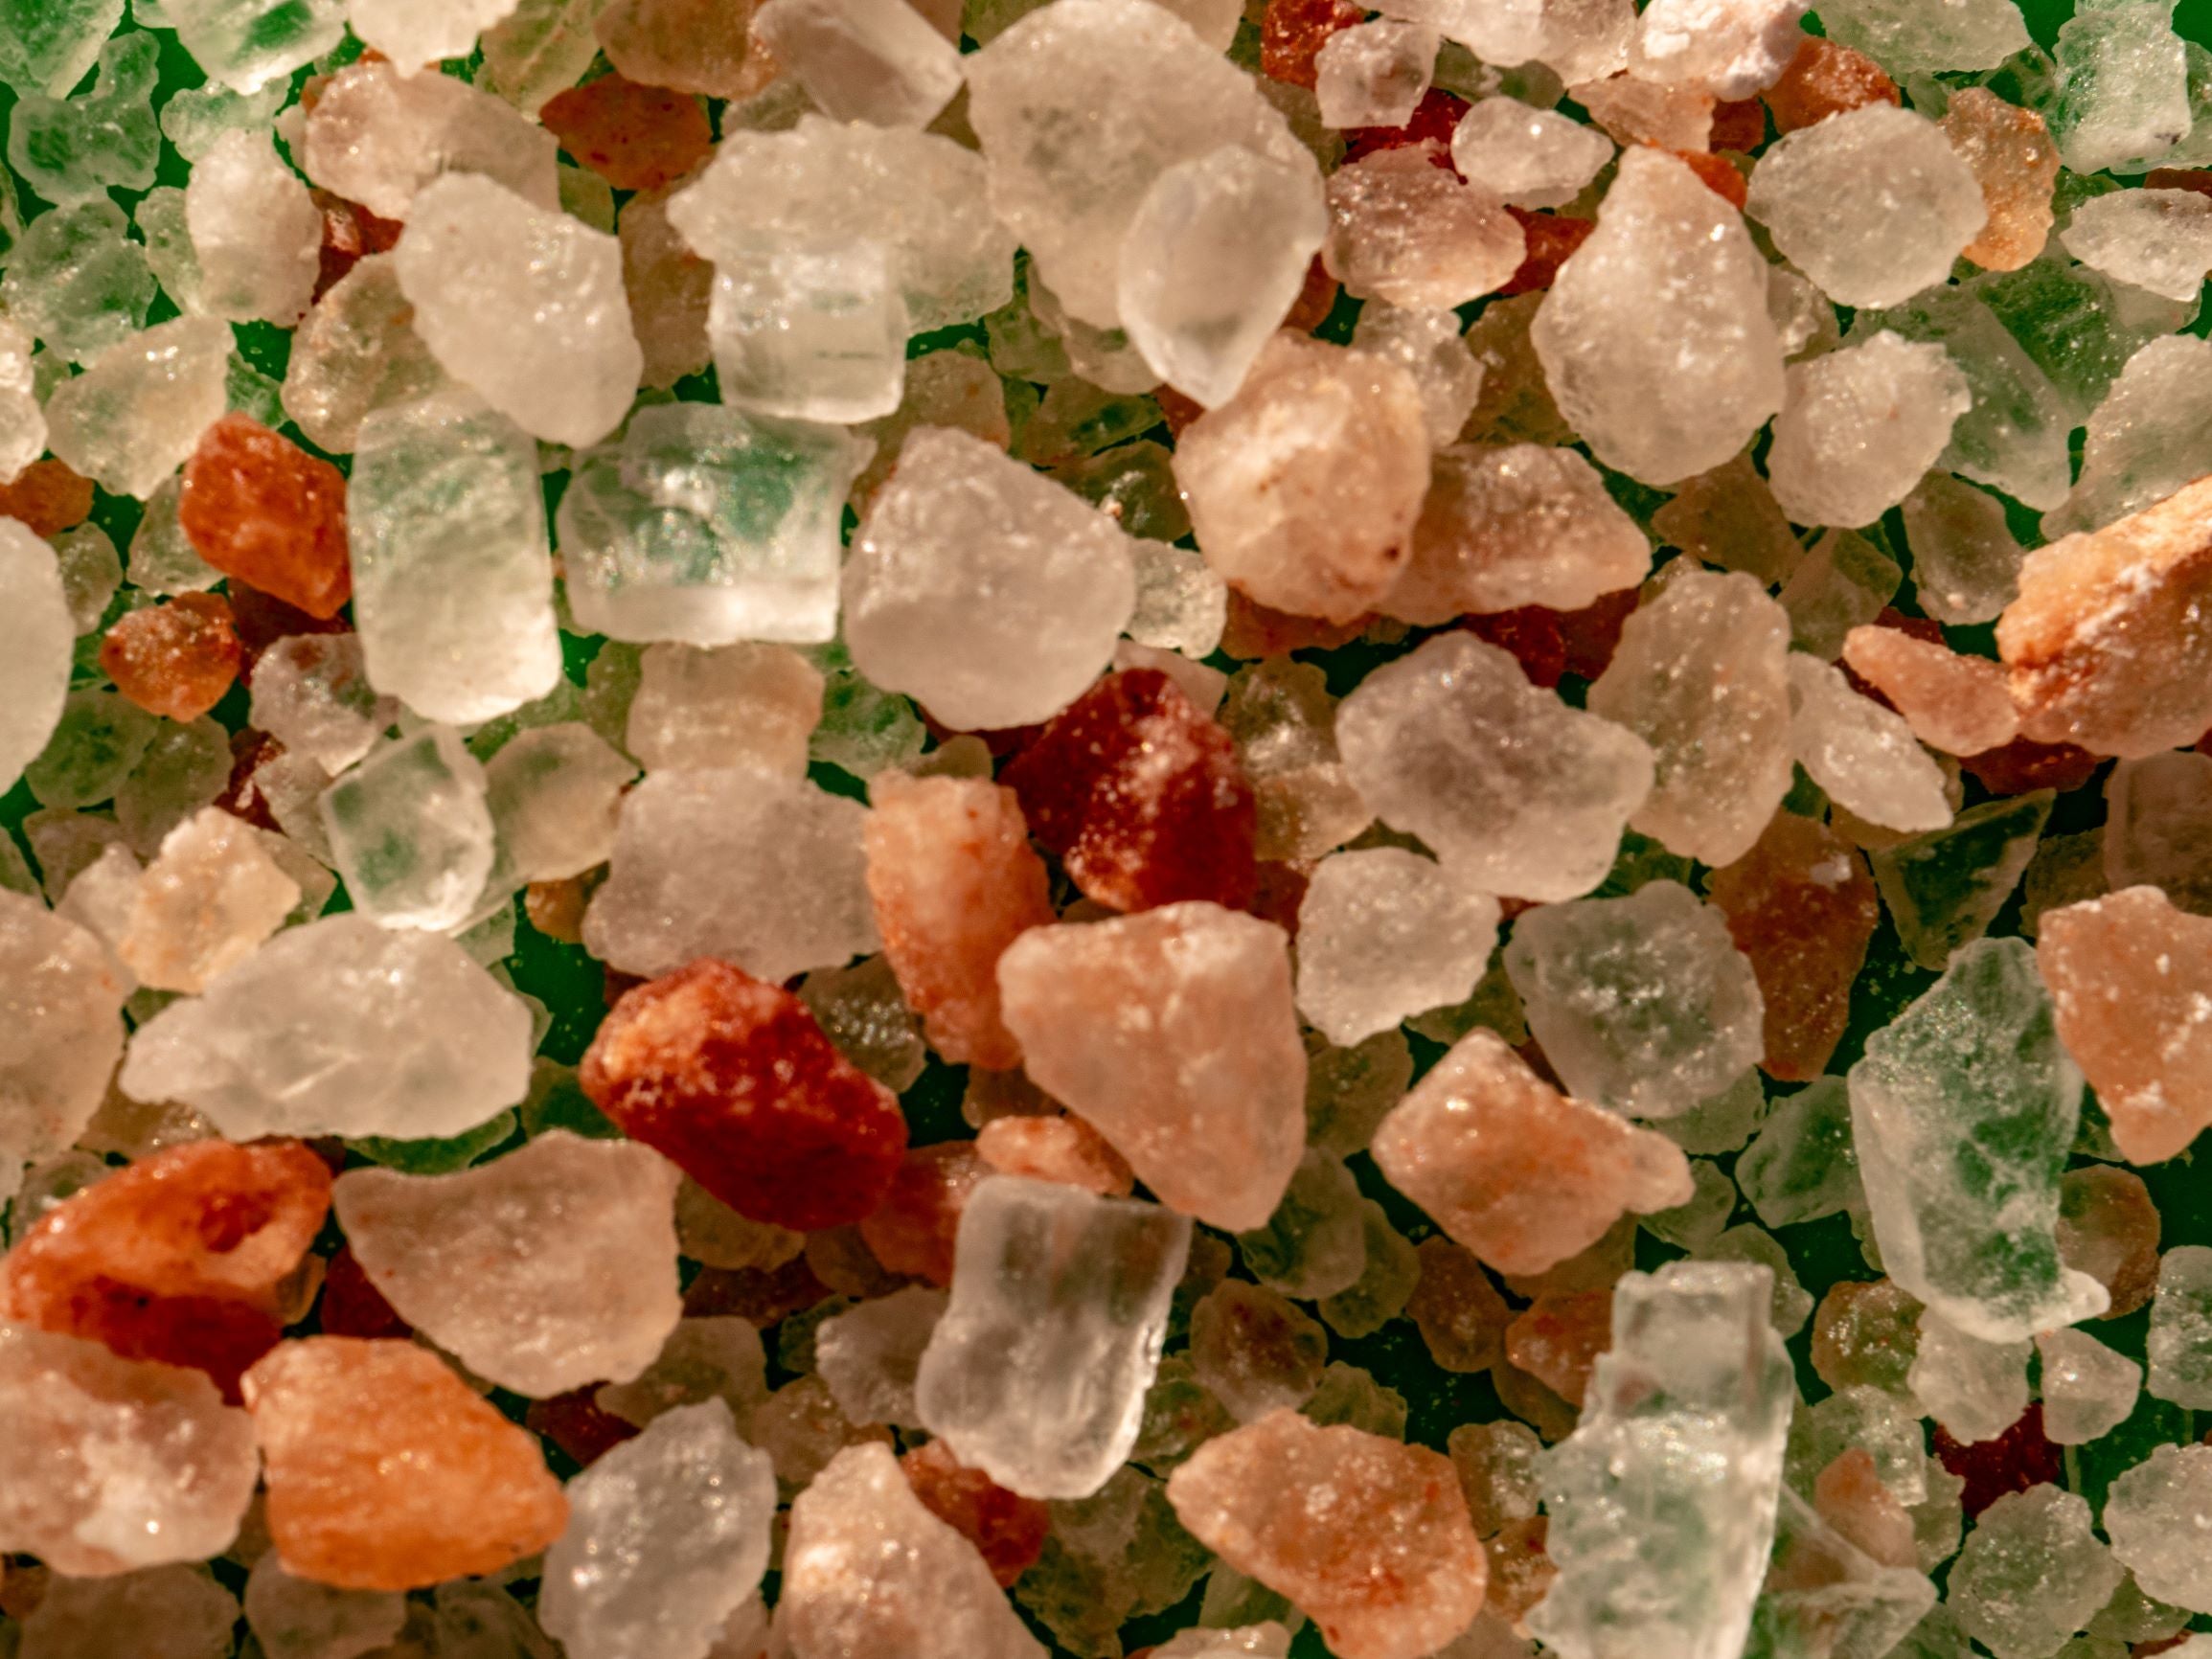 Celtic Sea Salt vs. Himalayan Sea Salt  Many of you have asked what the  differences are between Celtic Sea Salt and Himalayan Sea Salt. Here are  some of the most distinctive